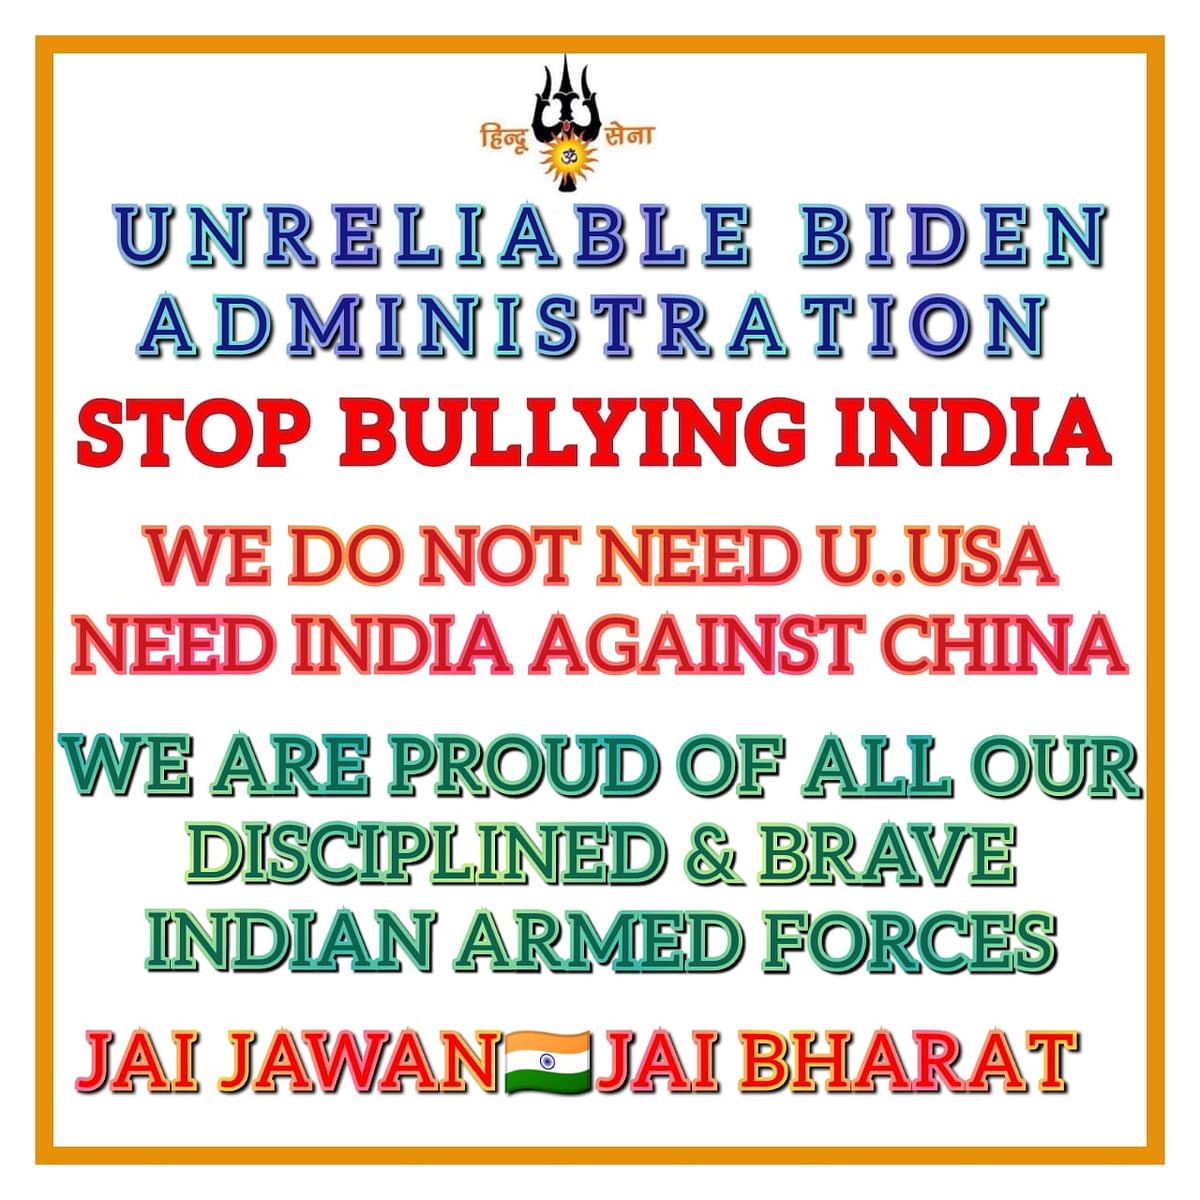 "Unreliable Biden administration, stop bullying India. We don't need you," the poster reads.